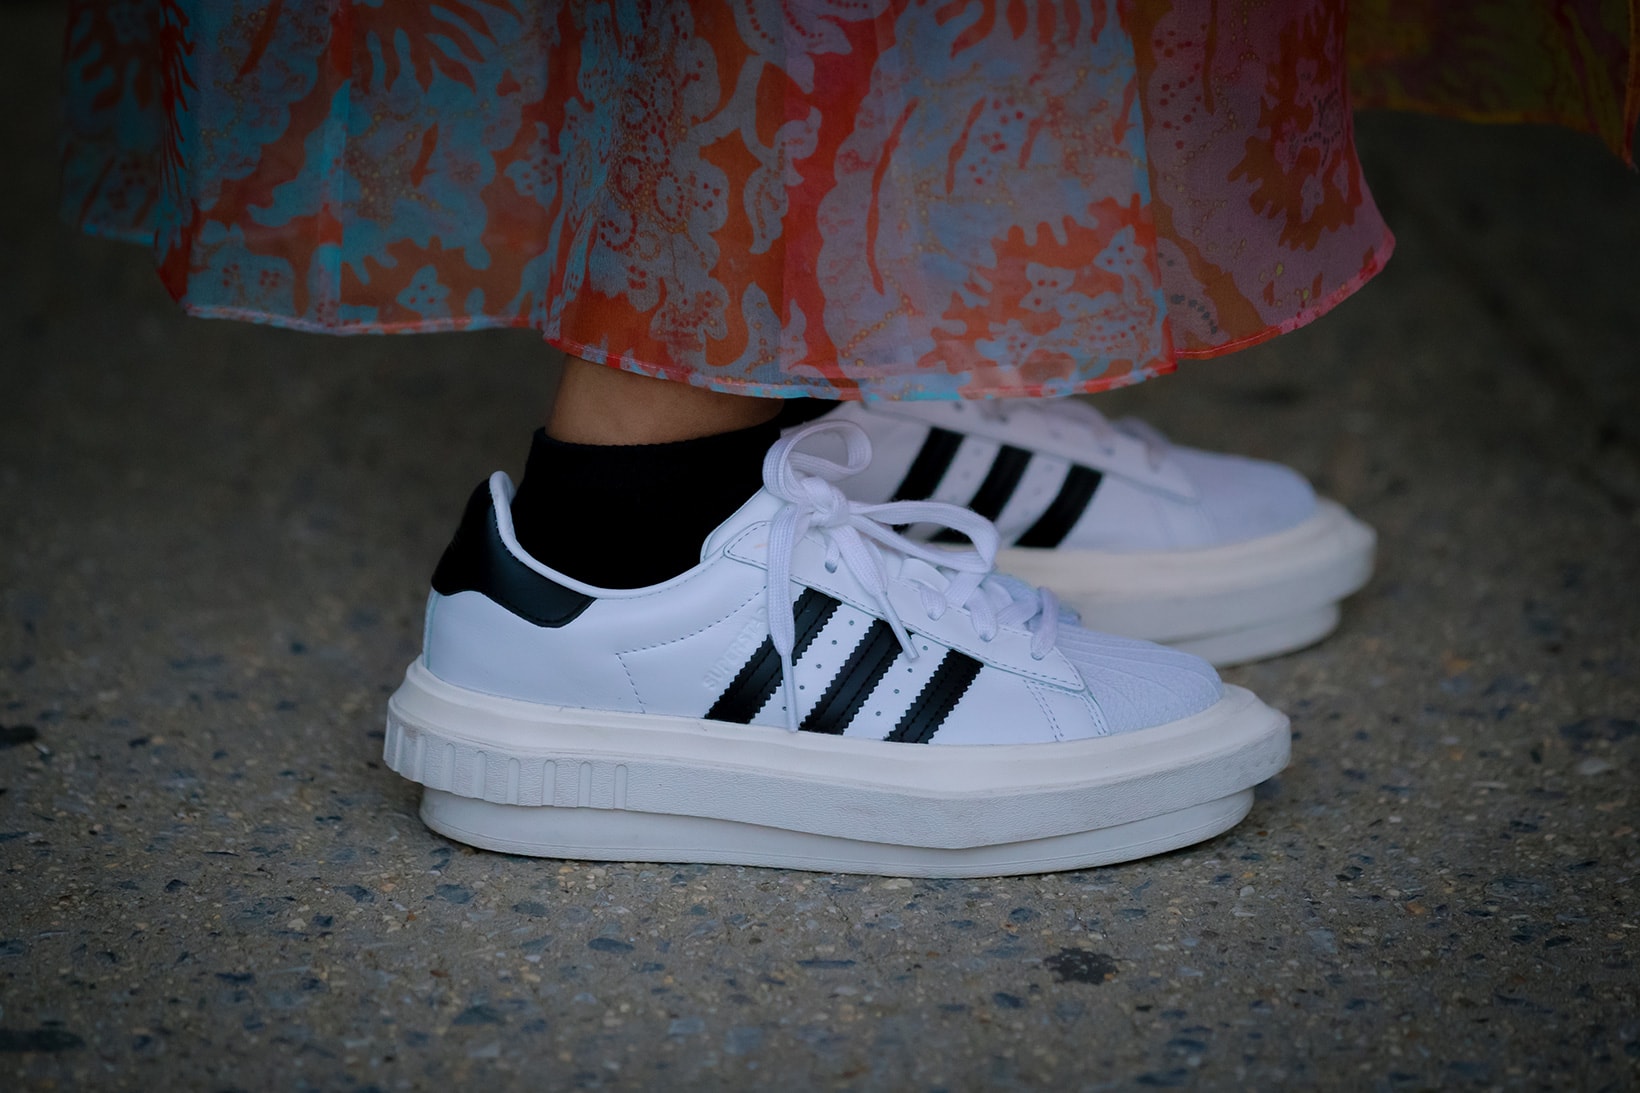 adidas Sneakers Outfit New York Fashion Week SS22 Best Street Style Trends Spring Summer 2022 Influencer